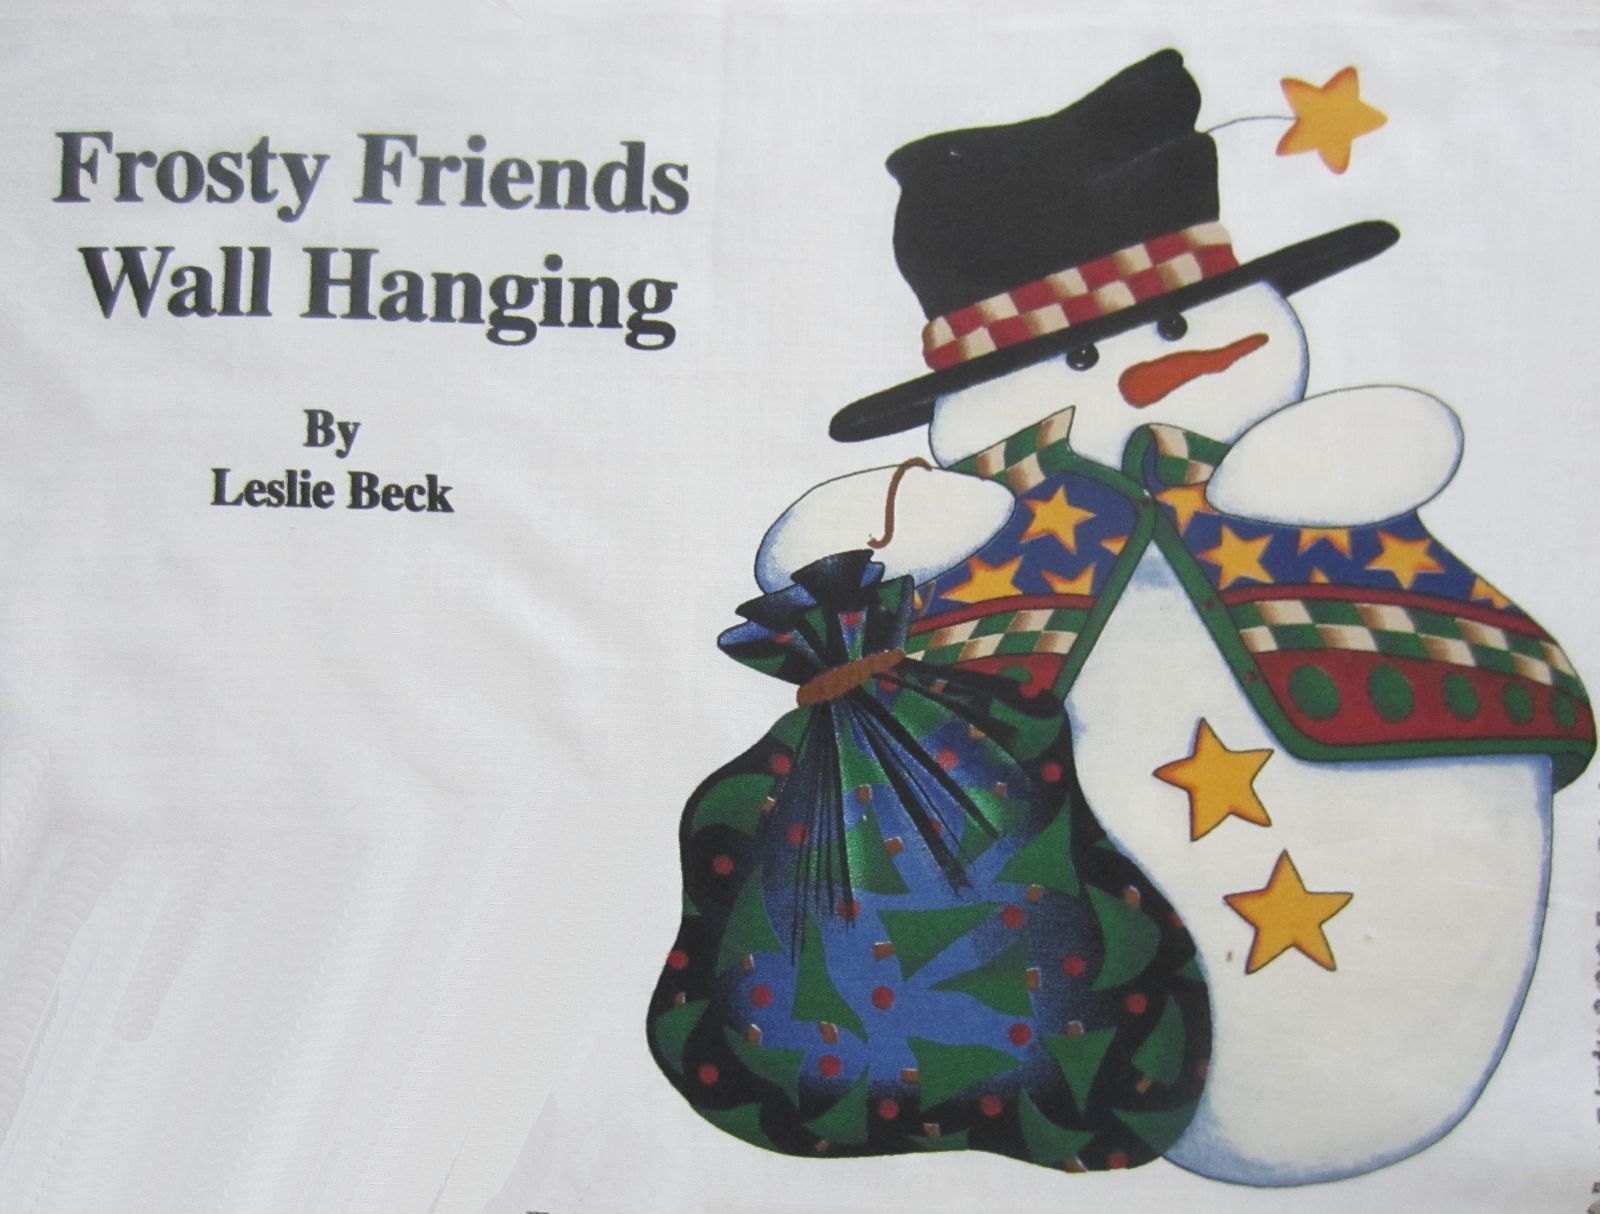 Cranston Print Works Beck Frosty Friends 41" x 33" Wall Hanging Fabric Panel - $14.99